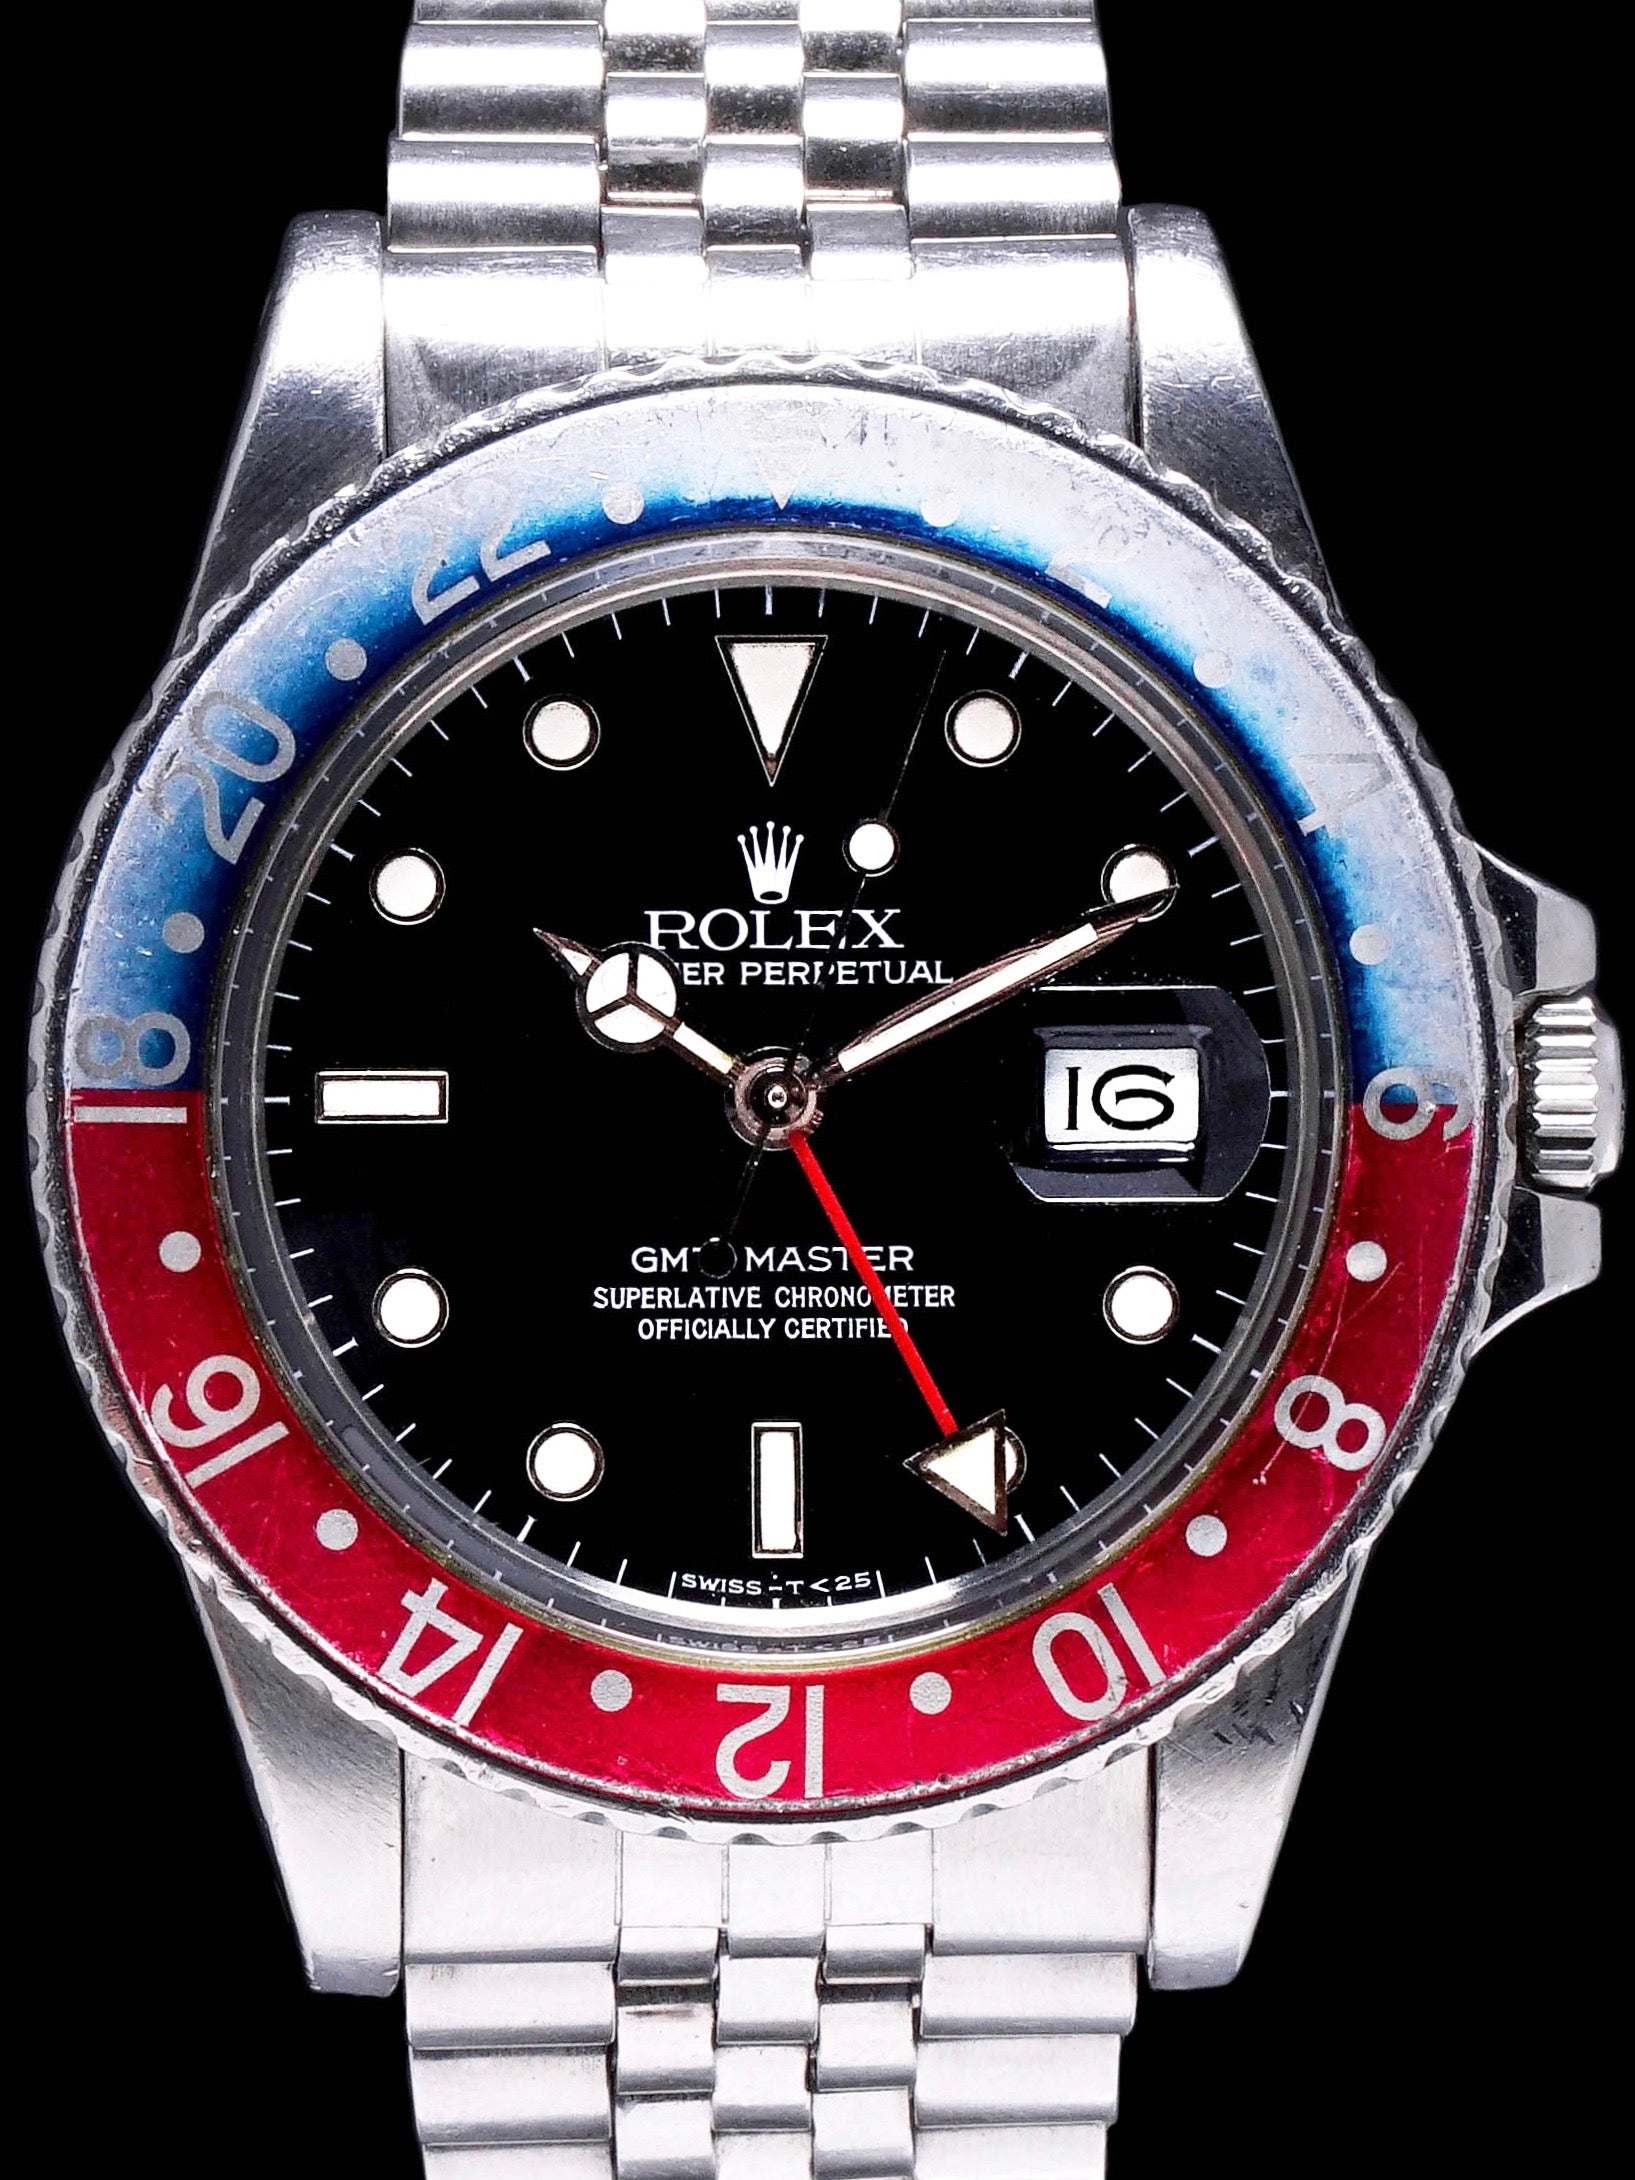 1984 Rolex GMT-Master (Ref. 16750) "Spider Dial" With Box and Booklet